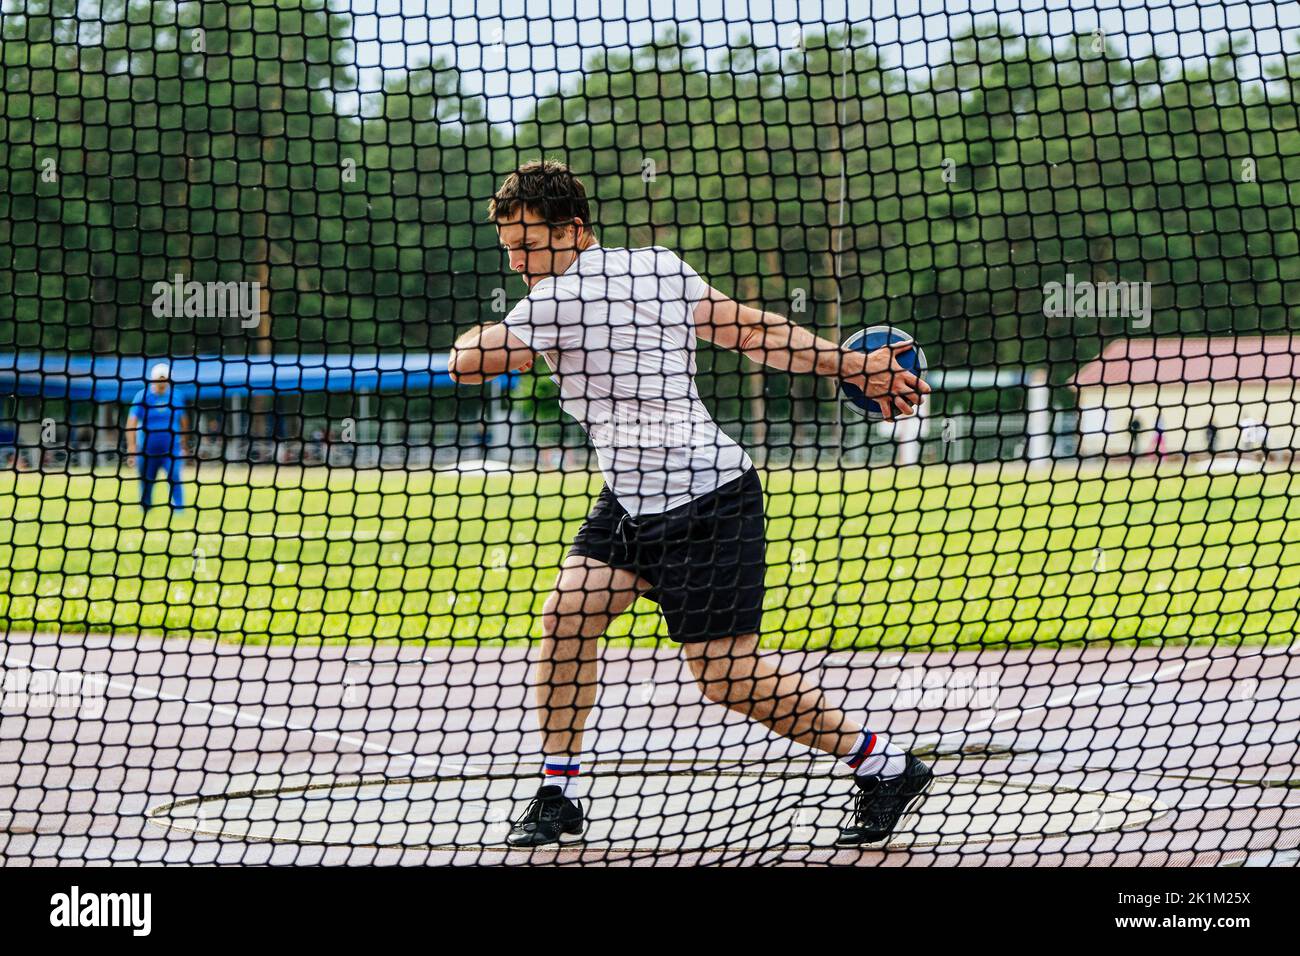 discus throwing attempt male athlete Stock Photo